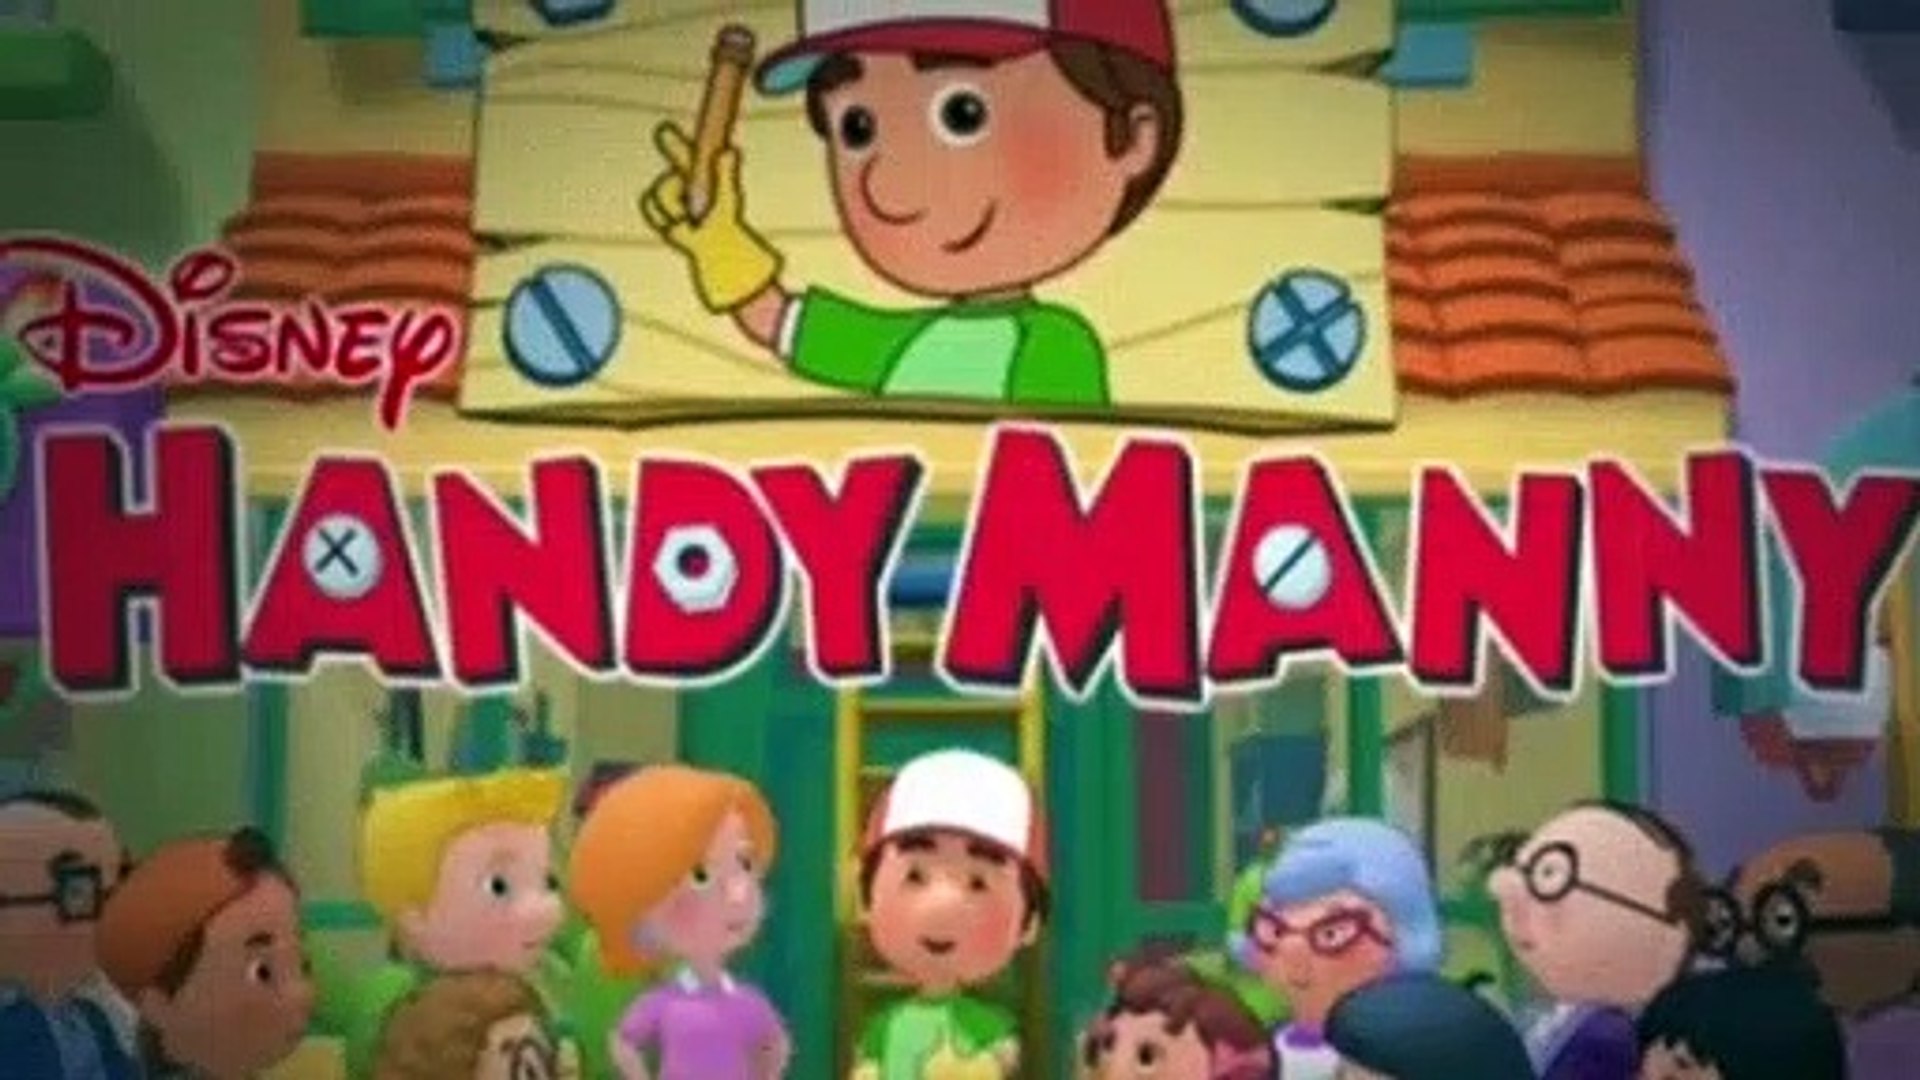 Handy Manny S02E21 Pedaln Tools CockaDoodleDo - video Dailymotion